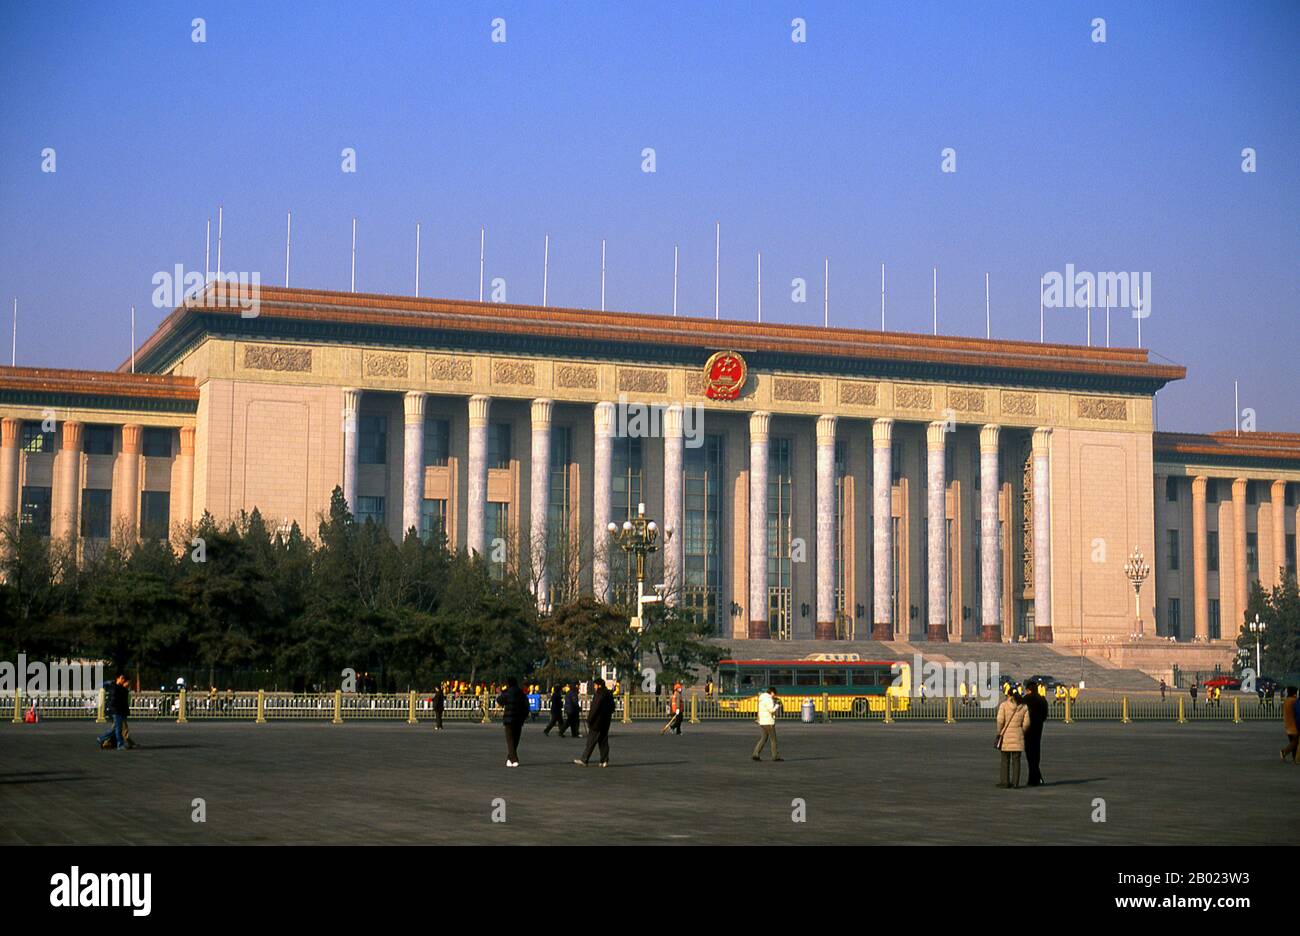 The Great Hall of the People, on the western edge of Tiananmen Square, was completed in 1959 and is the seat of the Chinese legislature. It functions as the meeting place of the National People's Congress, the Chinese parliament.  Tiananmen Square is the third largest public square in the world, covering 100 acres. It was used as a public gathering place during both the Ming and Qing dynasties.  The square is the political heart of modern China. Beijing university students came here to protest Japanese demands on China in 1919, and it was from the rostrum of the Gate of Heavenly Peace that Cha Stock Photo